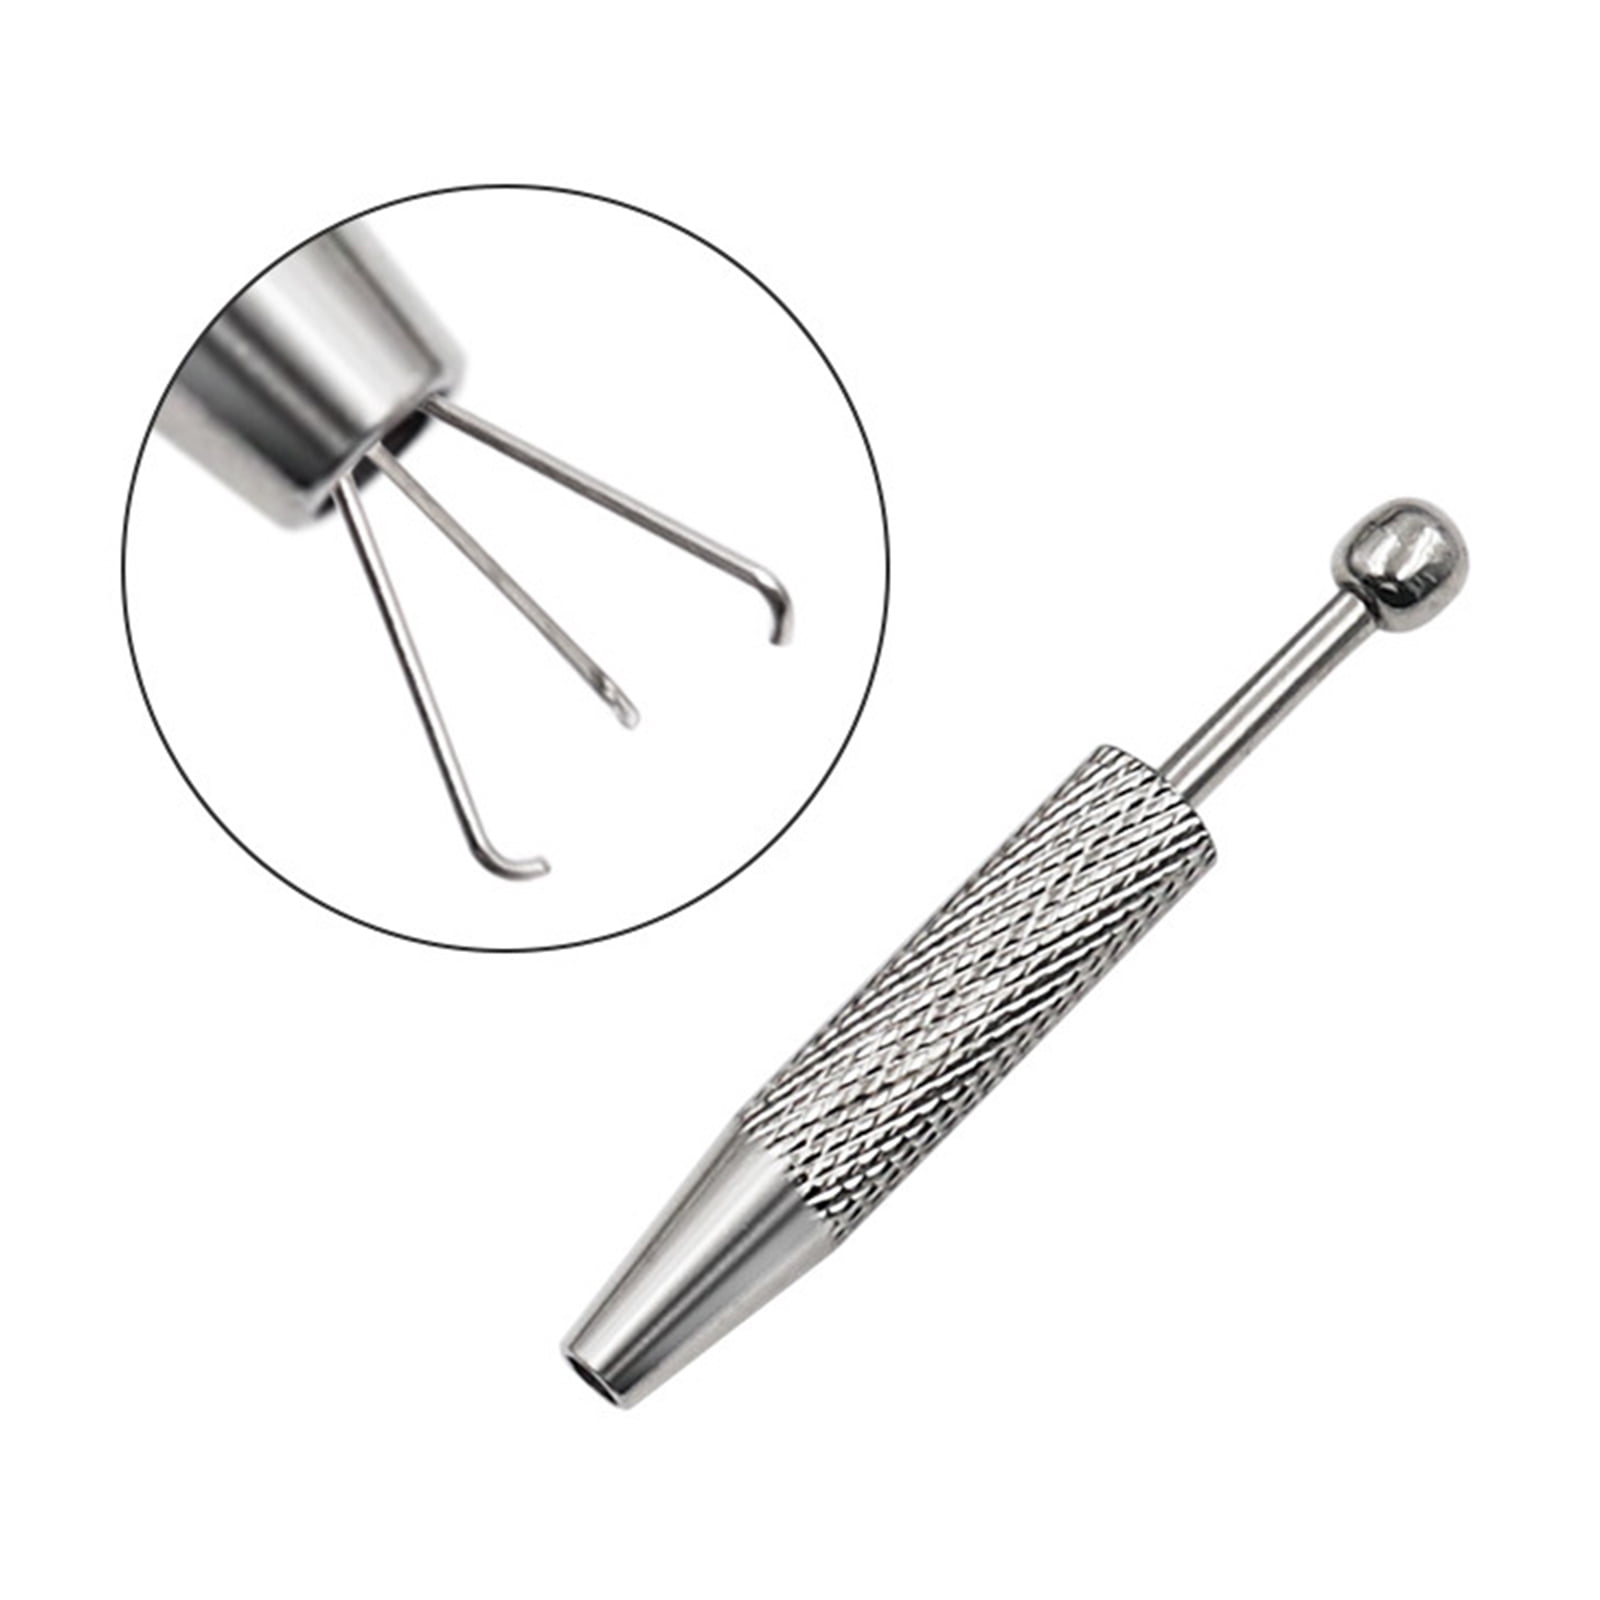 Grevosea 2 Pack Piercing Ball Grabber Tool, Stainless Steel Jeweler's Pick  Up Tool with 4 Prongs Holder Diamond Claw Tweezers for Tiny Objects Ic